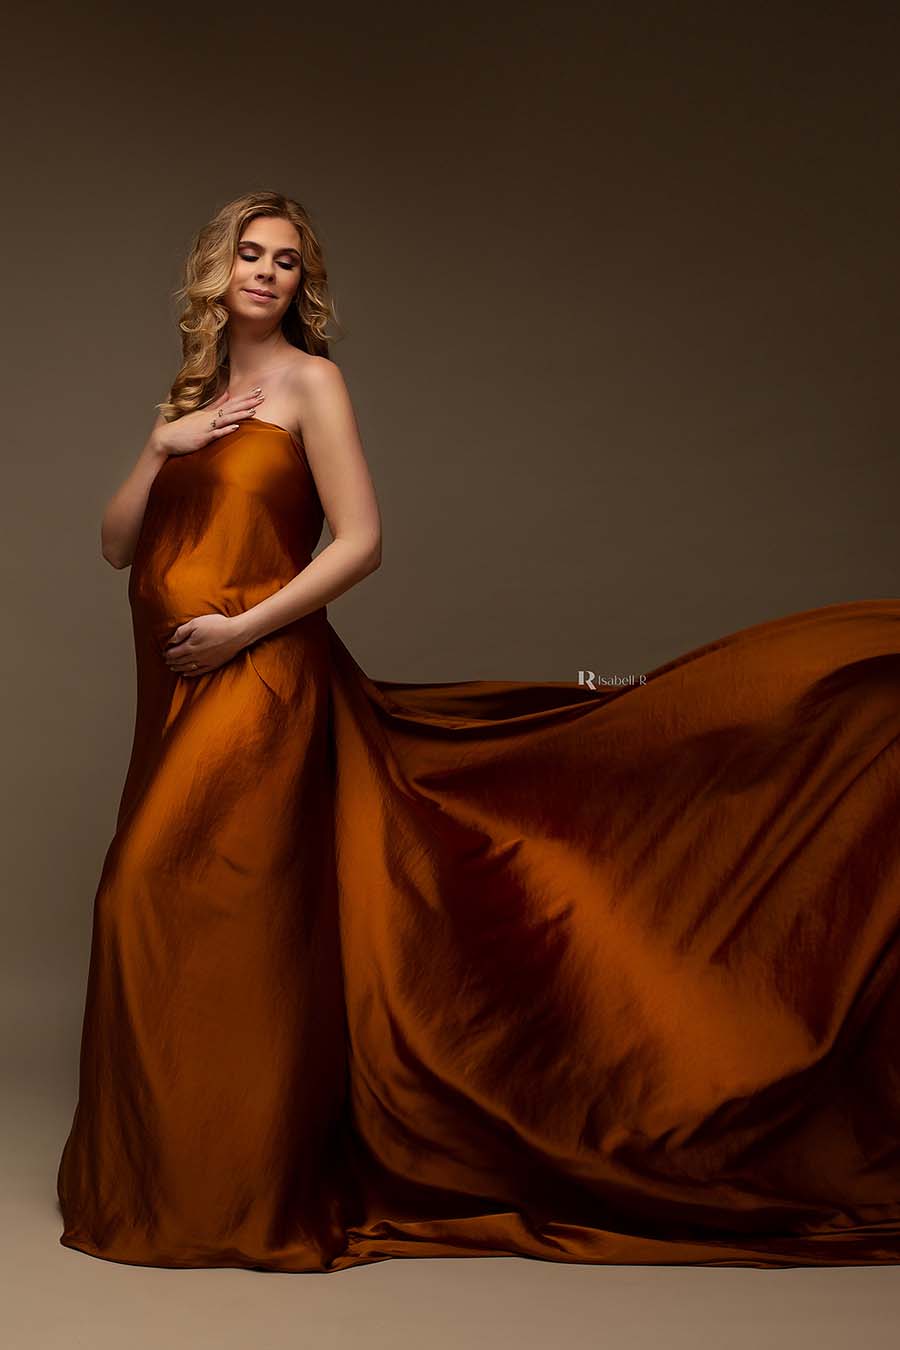 blond model covers her breast and belly with a cognac scarf. she has her eyes closed and one of her hands resting on her chest.